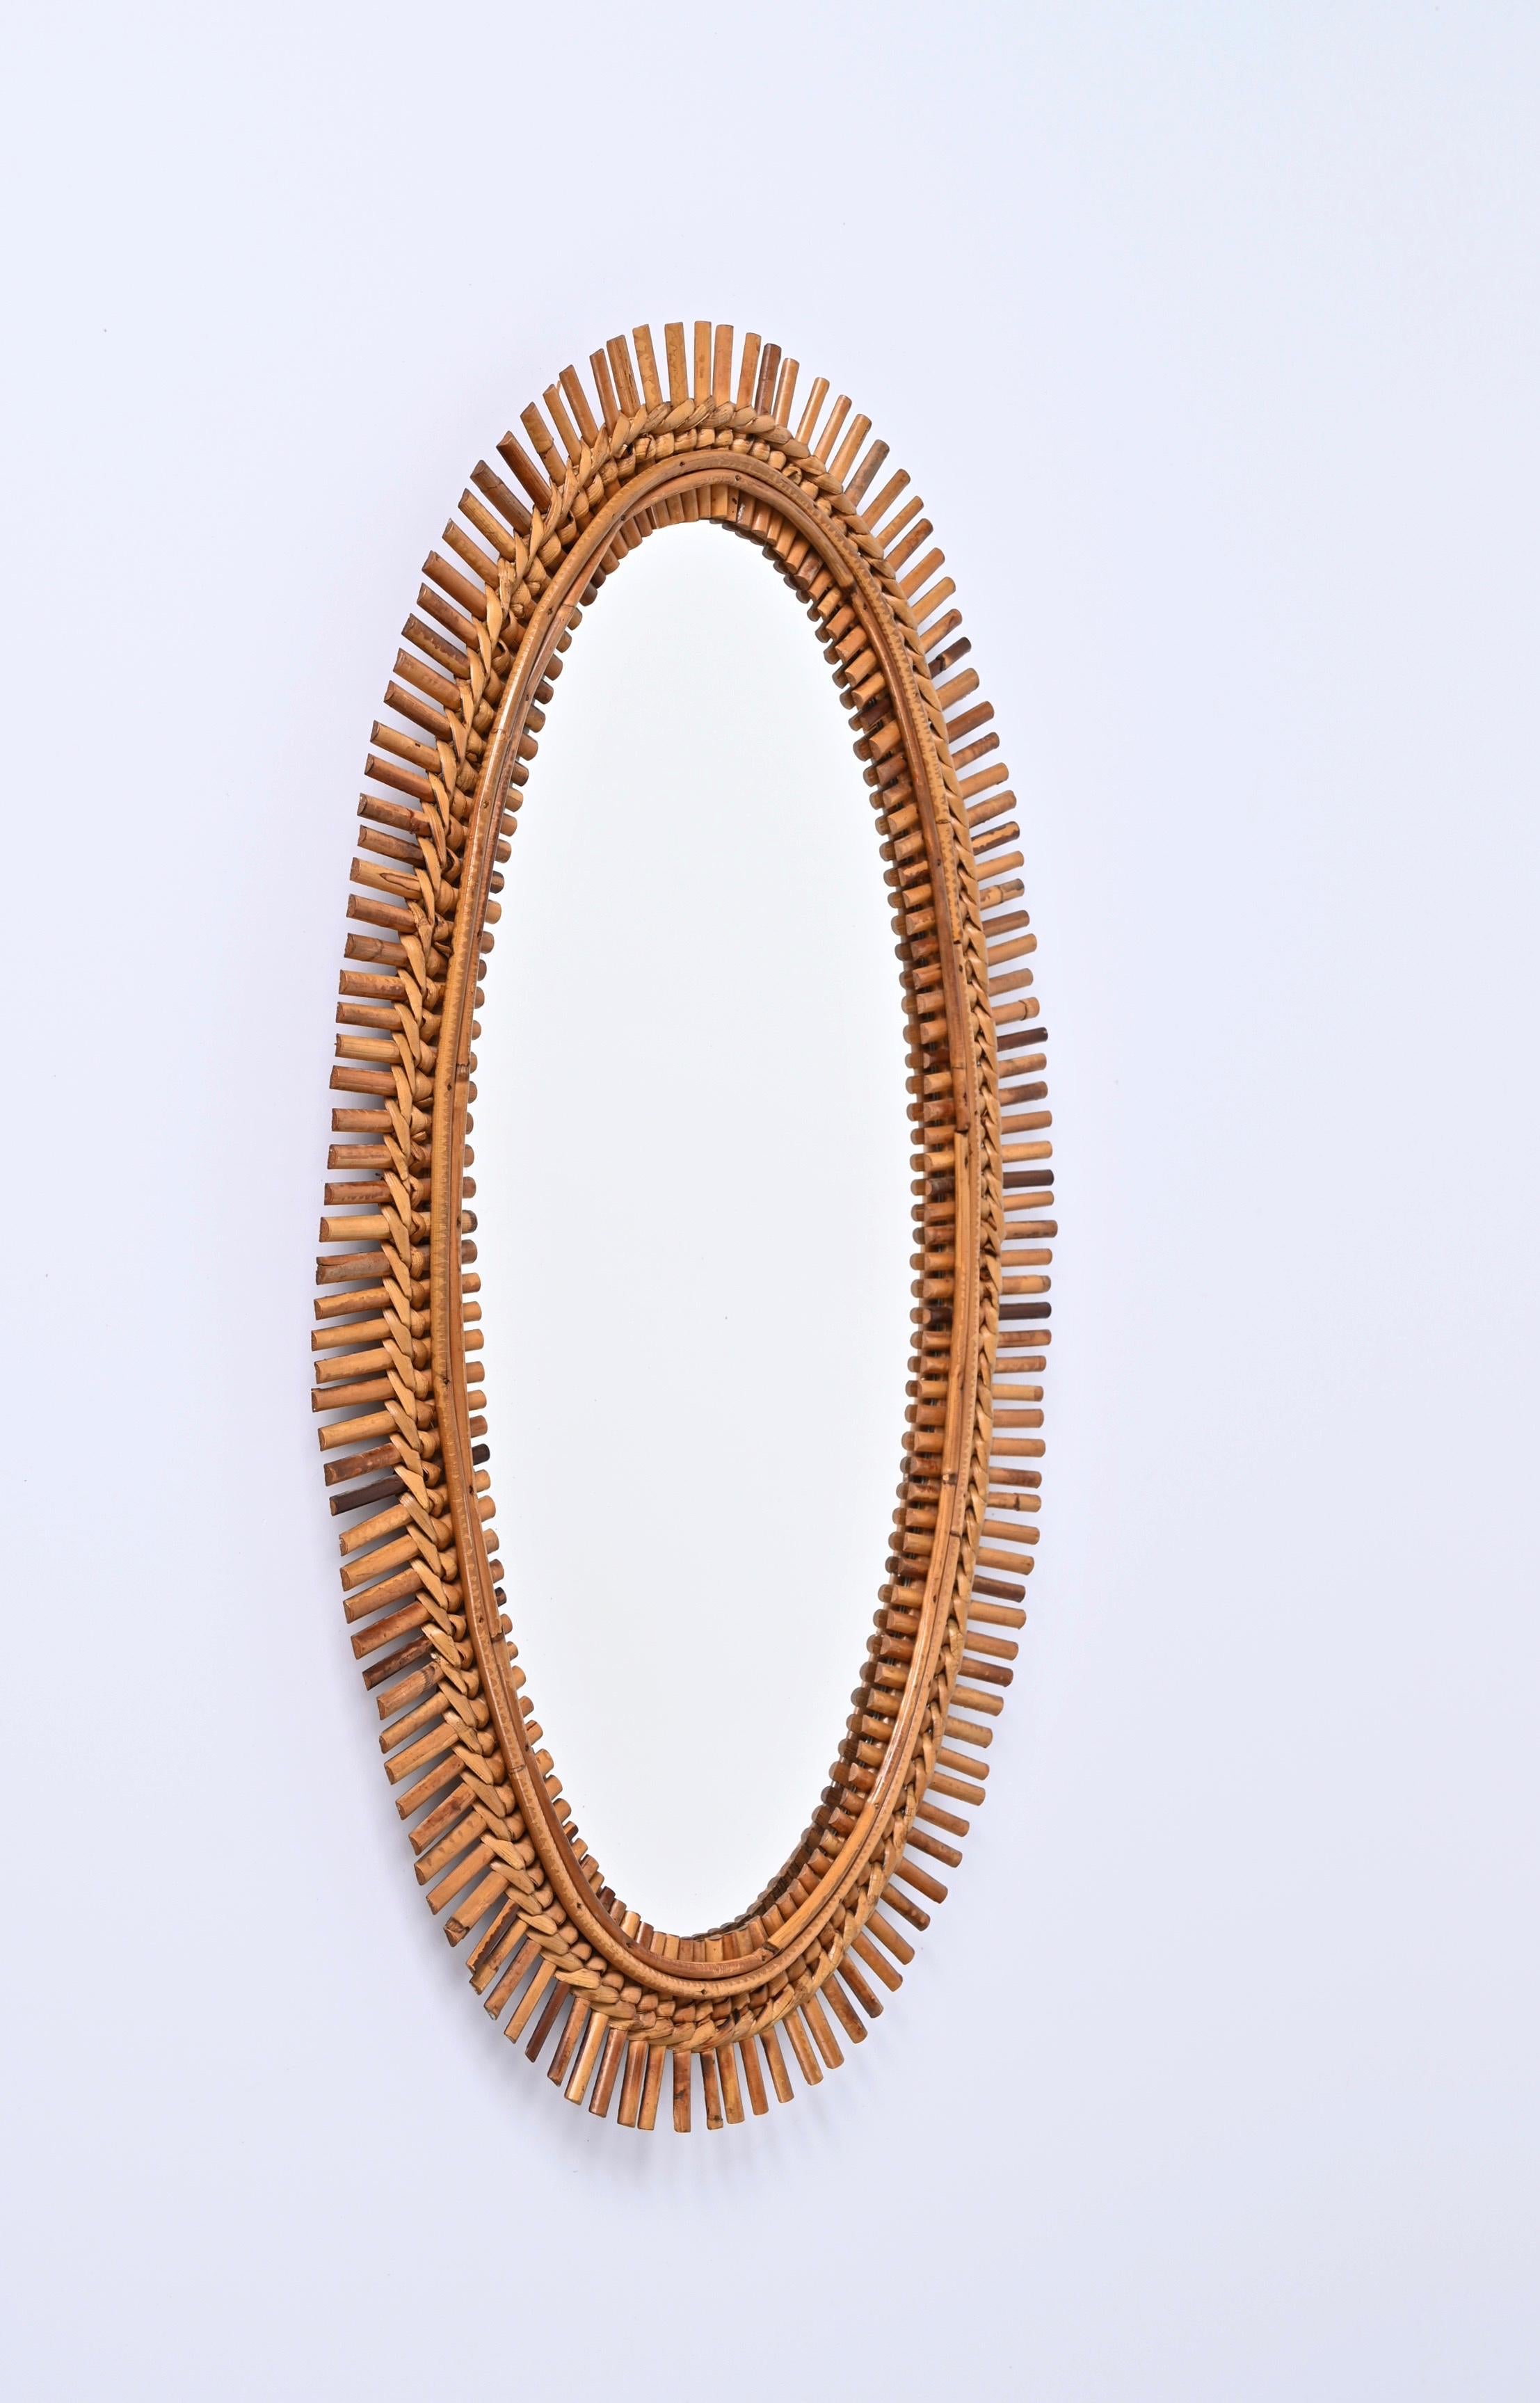 Mid-20th Century Midcentury French Riviera Oval Wall Mirror with Bamboo and Rattan Frame, 1960s